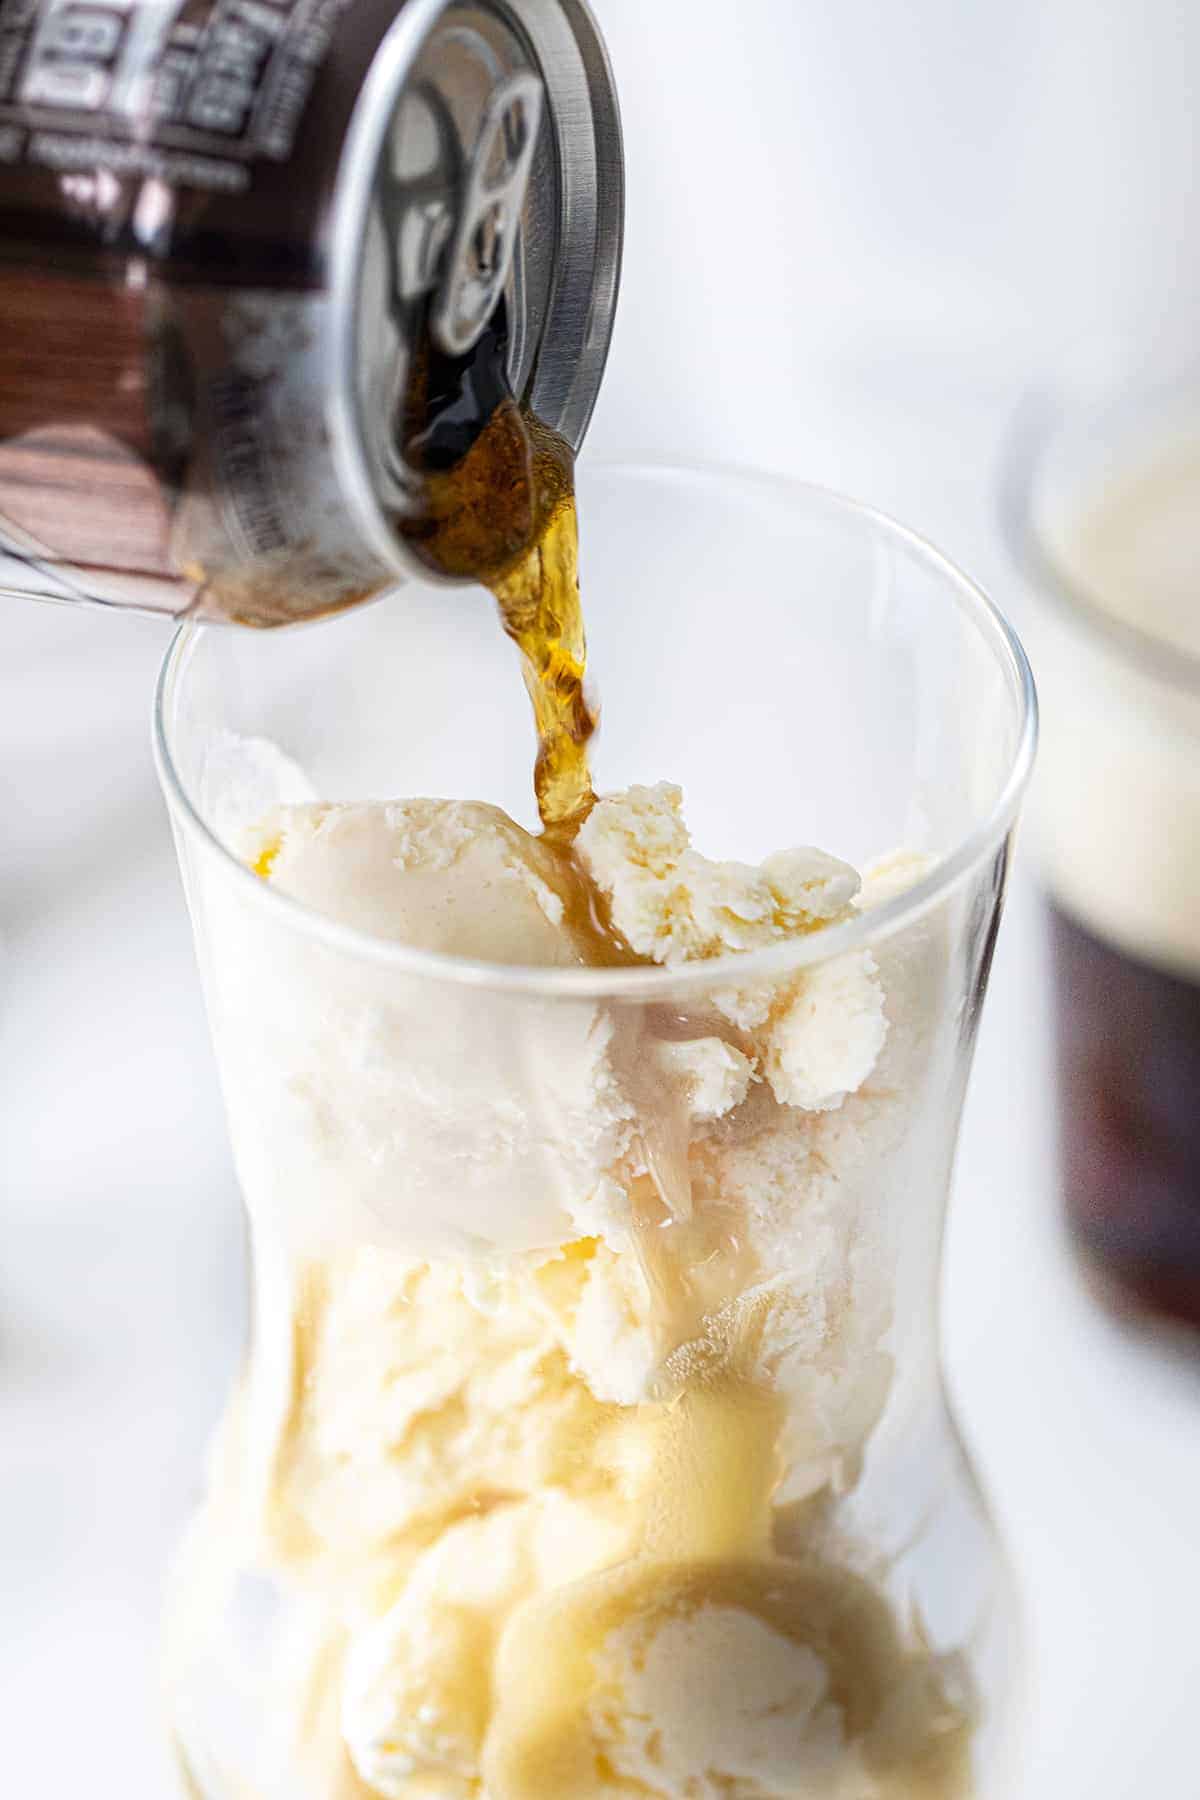 Pouring Root Beer Into Glass Filled with Ice Cream to Make Dirty Root Beer Float - RumChata Root Beer Float.